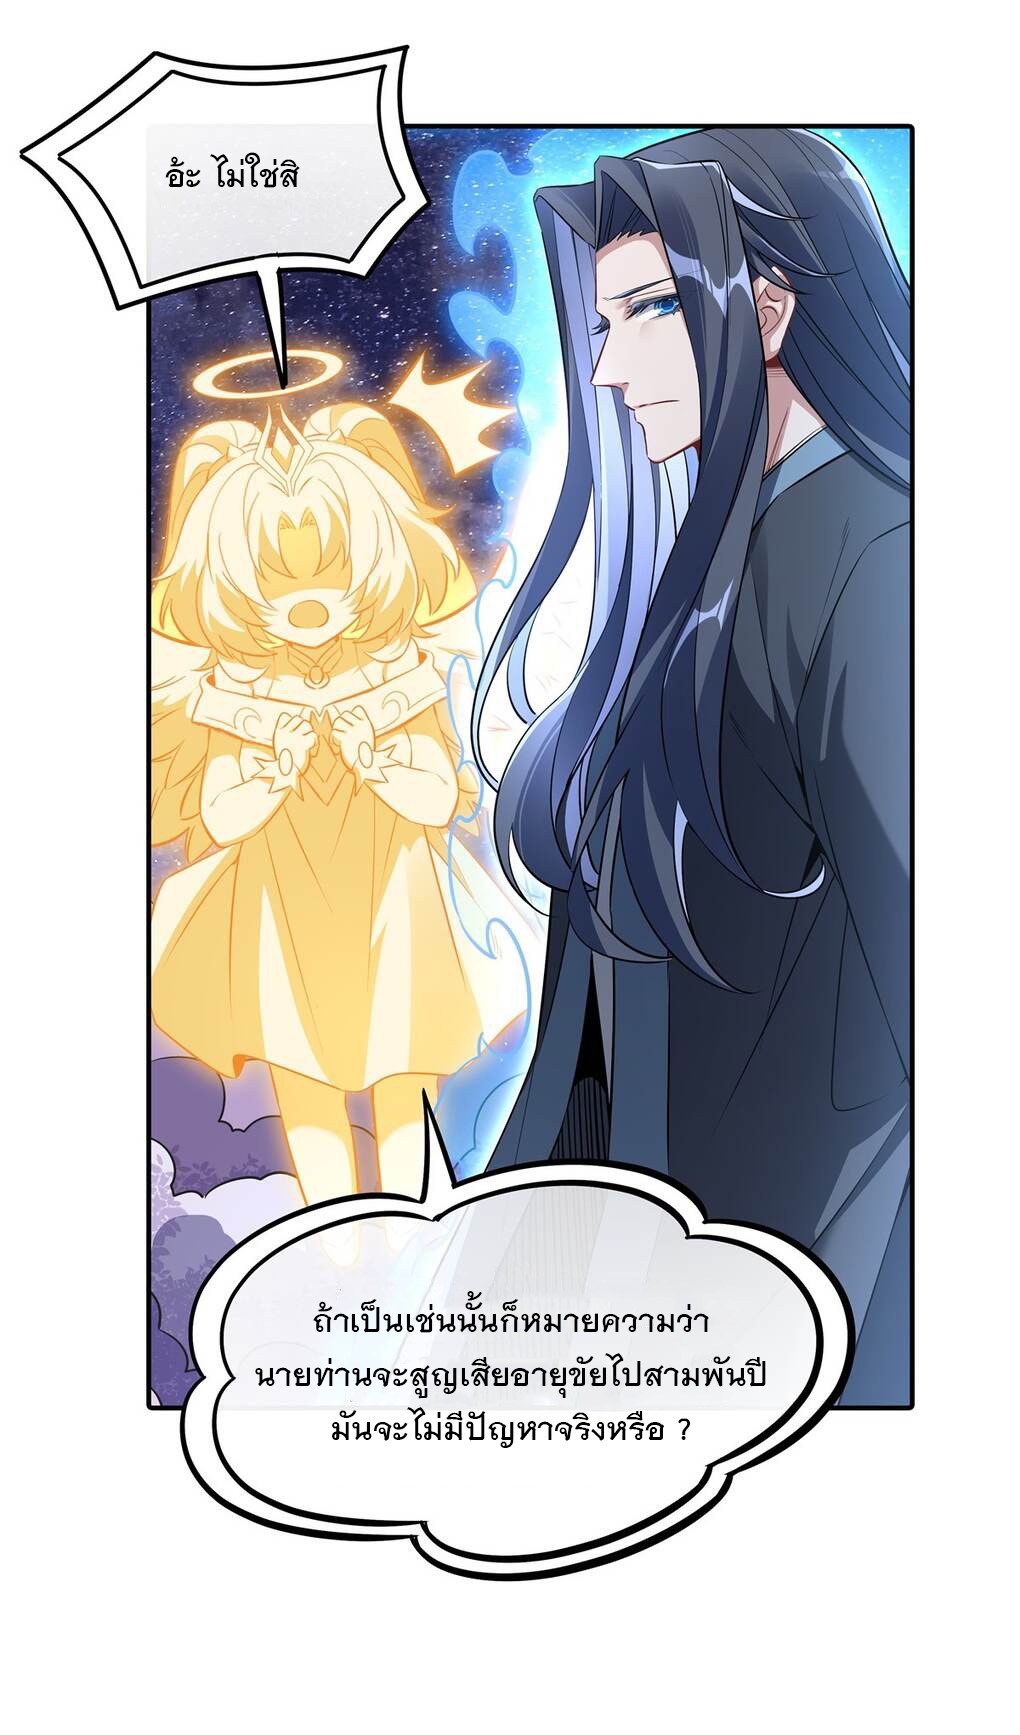 My Female Apprentices Are All Big Shots From the Future Ã Â¸â€¢Ã Â¸Â­Ã Â¸â„¢Ã Â¸â€”Ã Â¸ÂµÃ Â¹Ë† 92 (31)